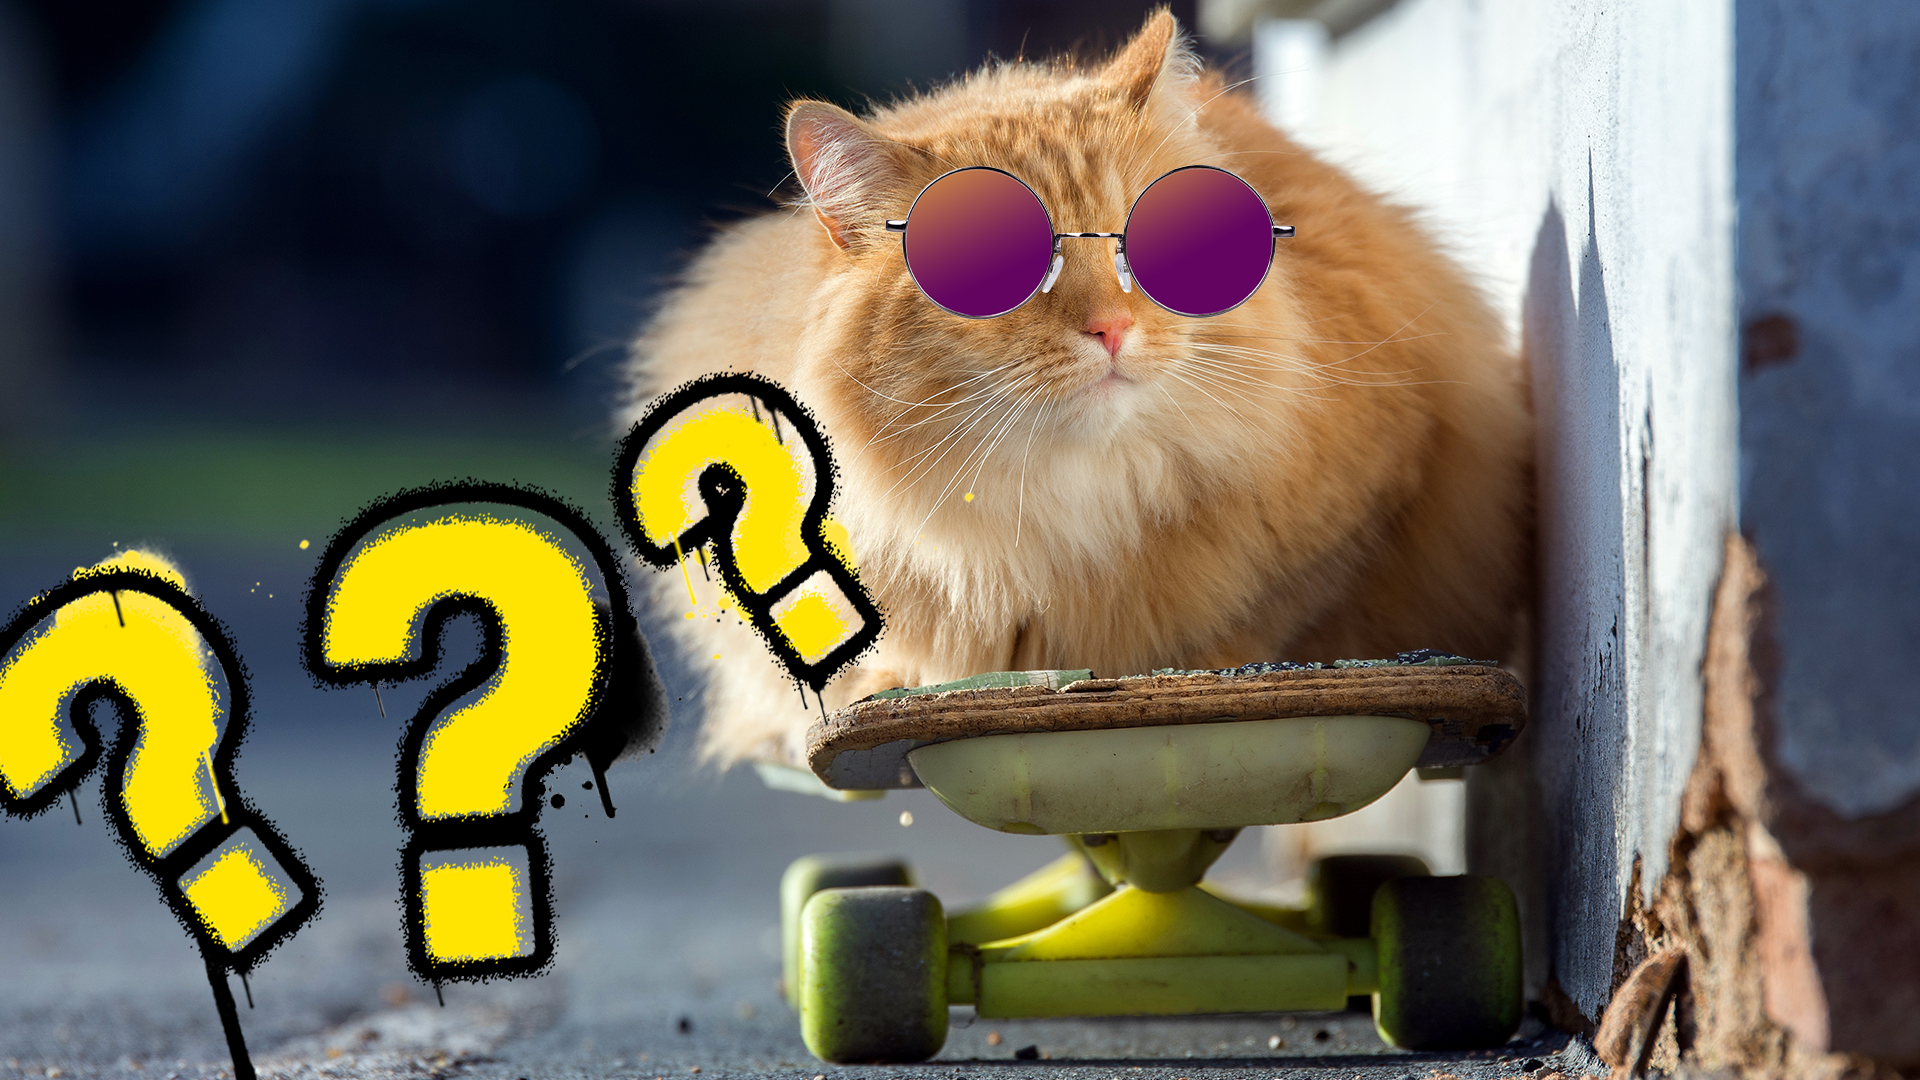 Cat on skateboard with sunglasses